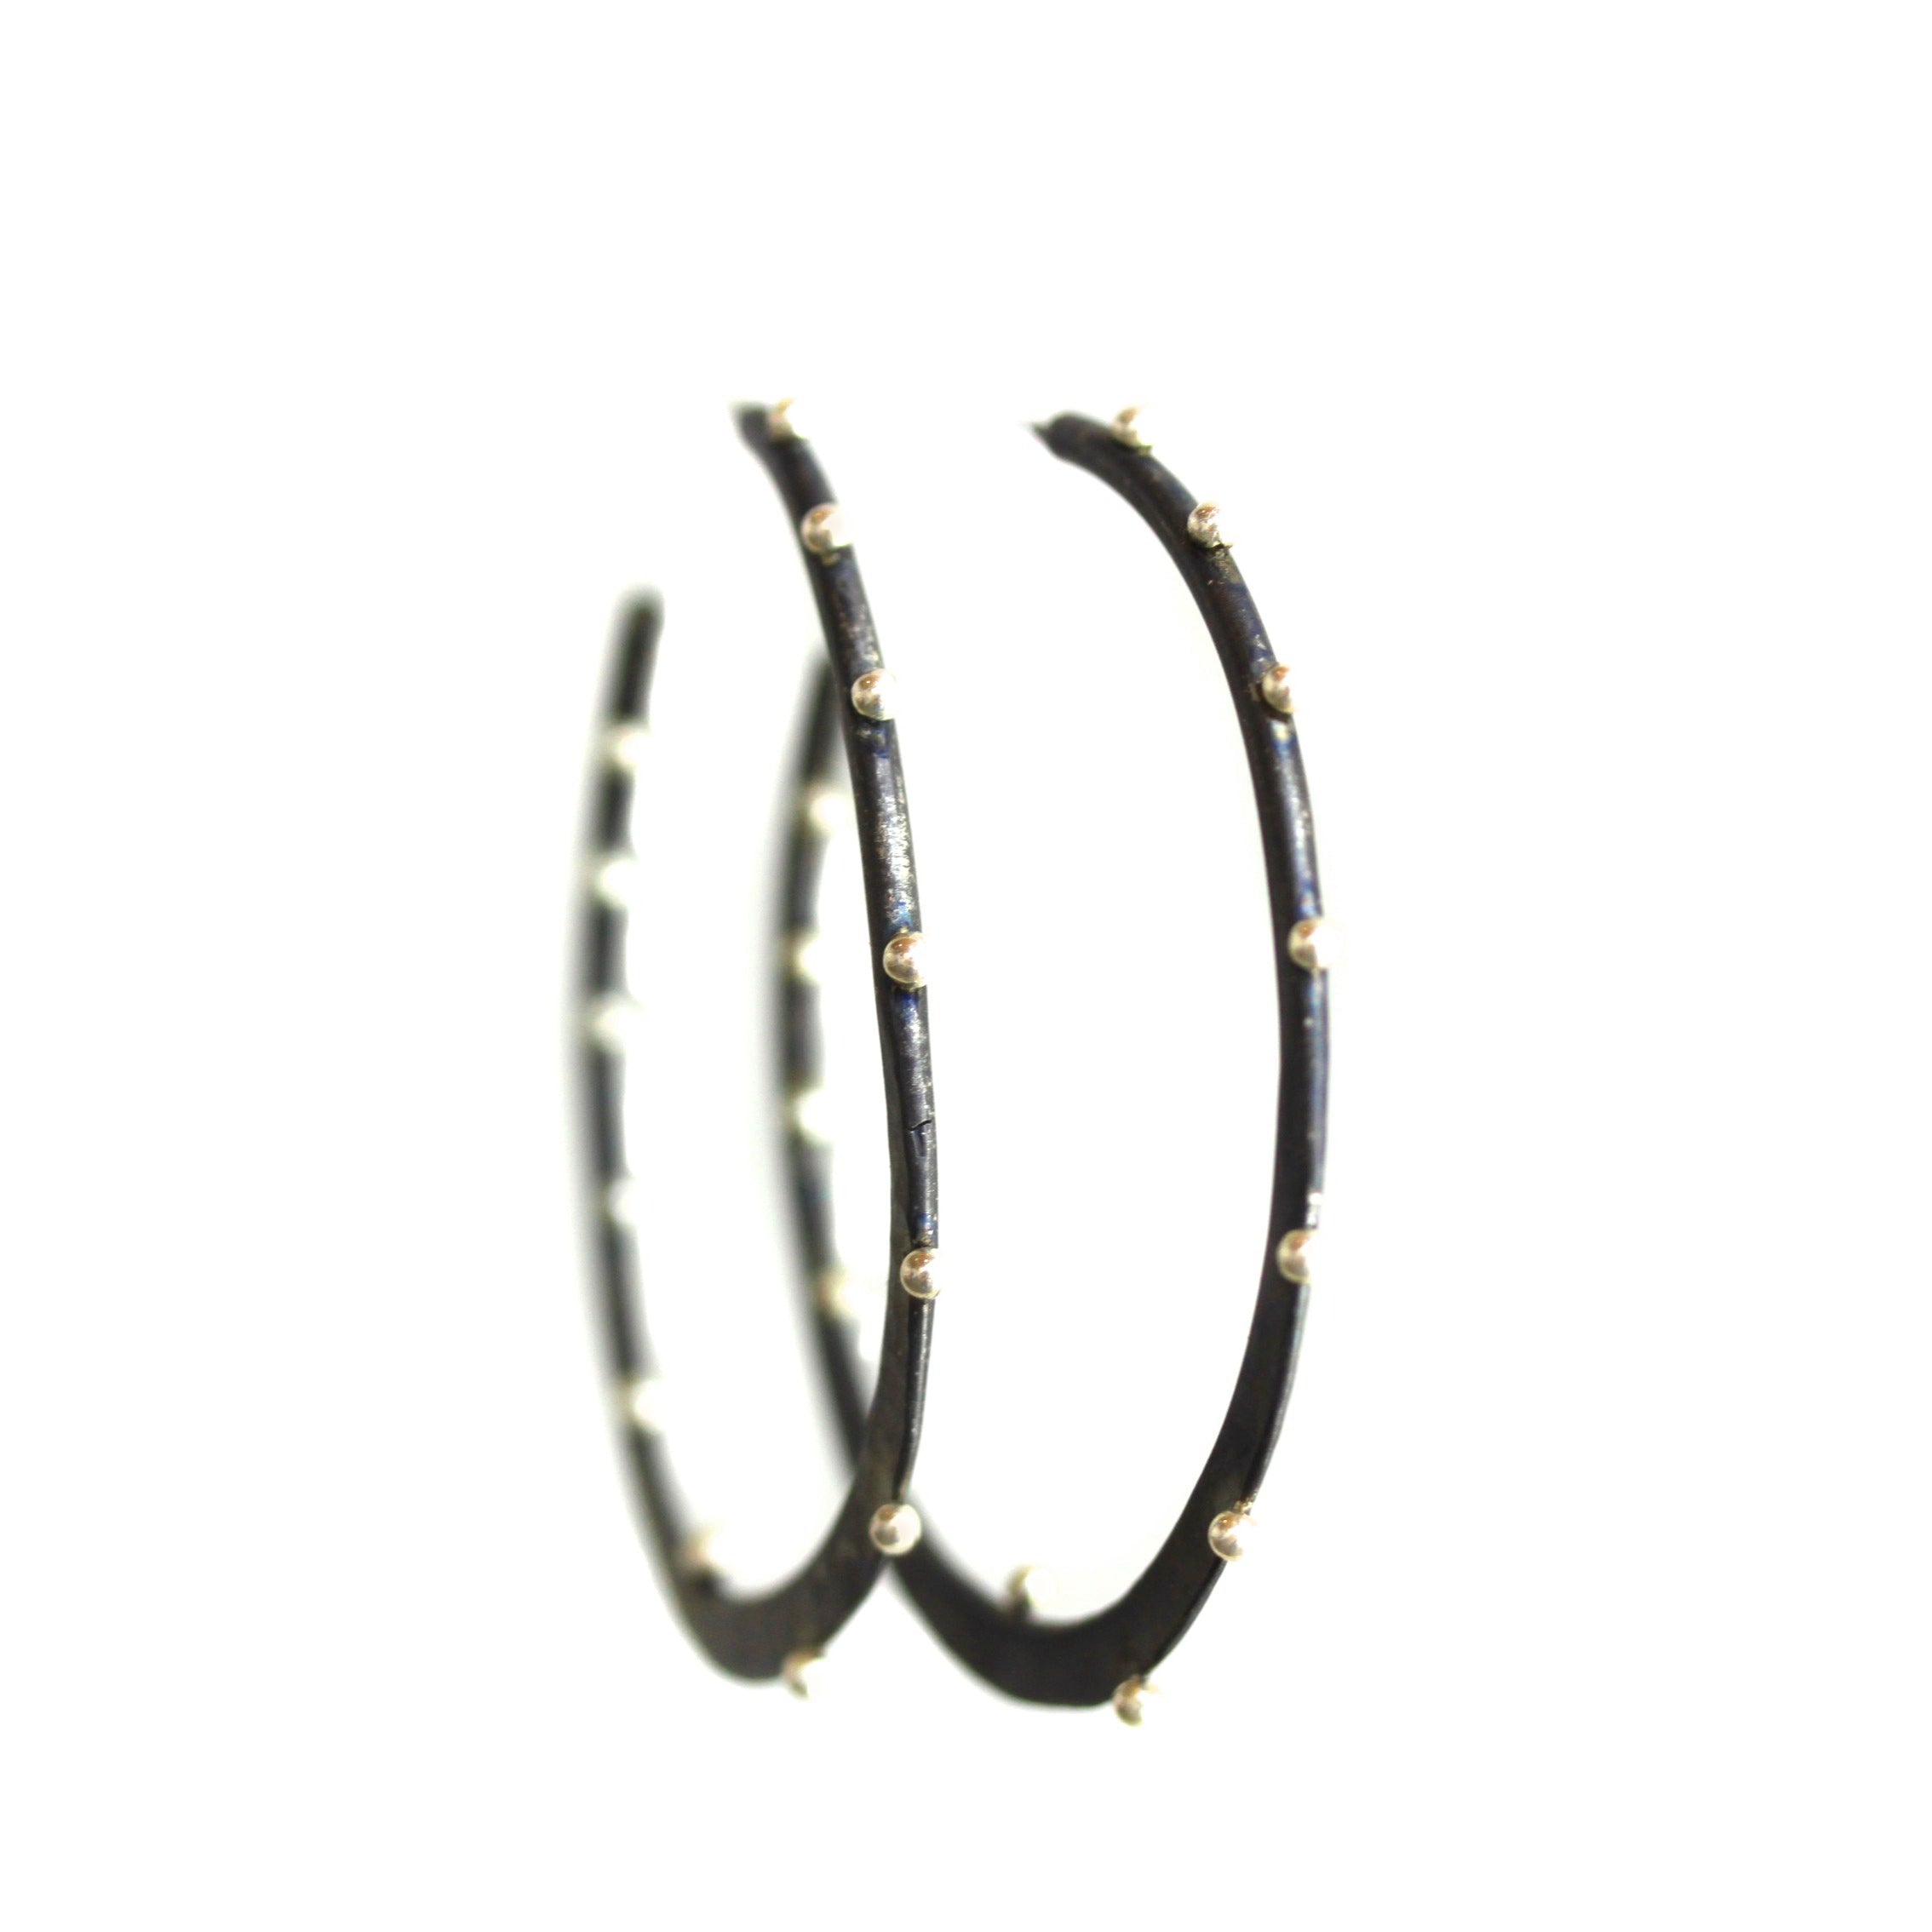 Inside Out Yellow Gold Studded Hoop Earrings